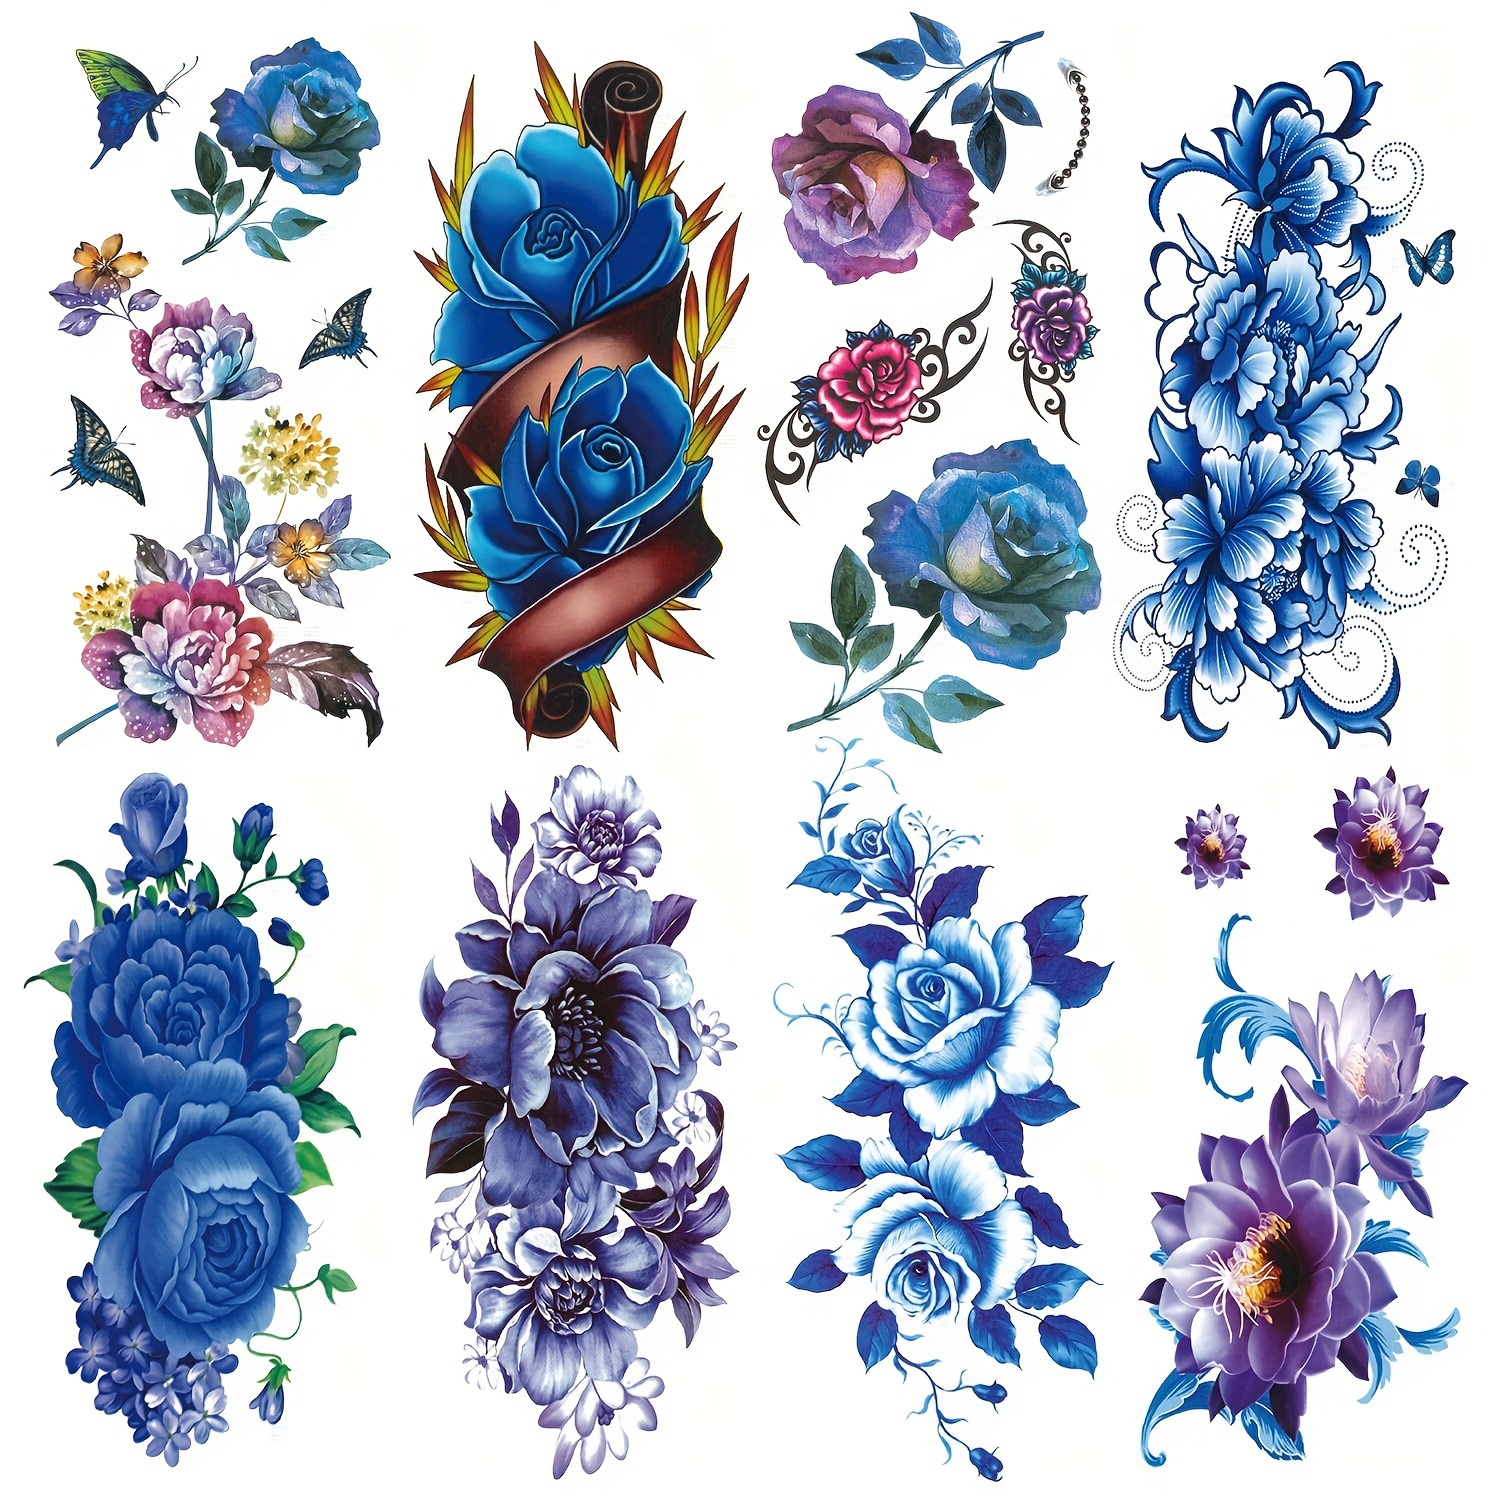 

easy-apply" 8-piece Waterproof Temporary Tattoos - Blue & Purple Roses, Lotus Flowers & Butterflies | Long-lasting Fashion Arm Stickers For Women